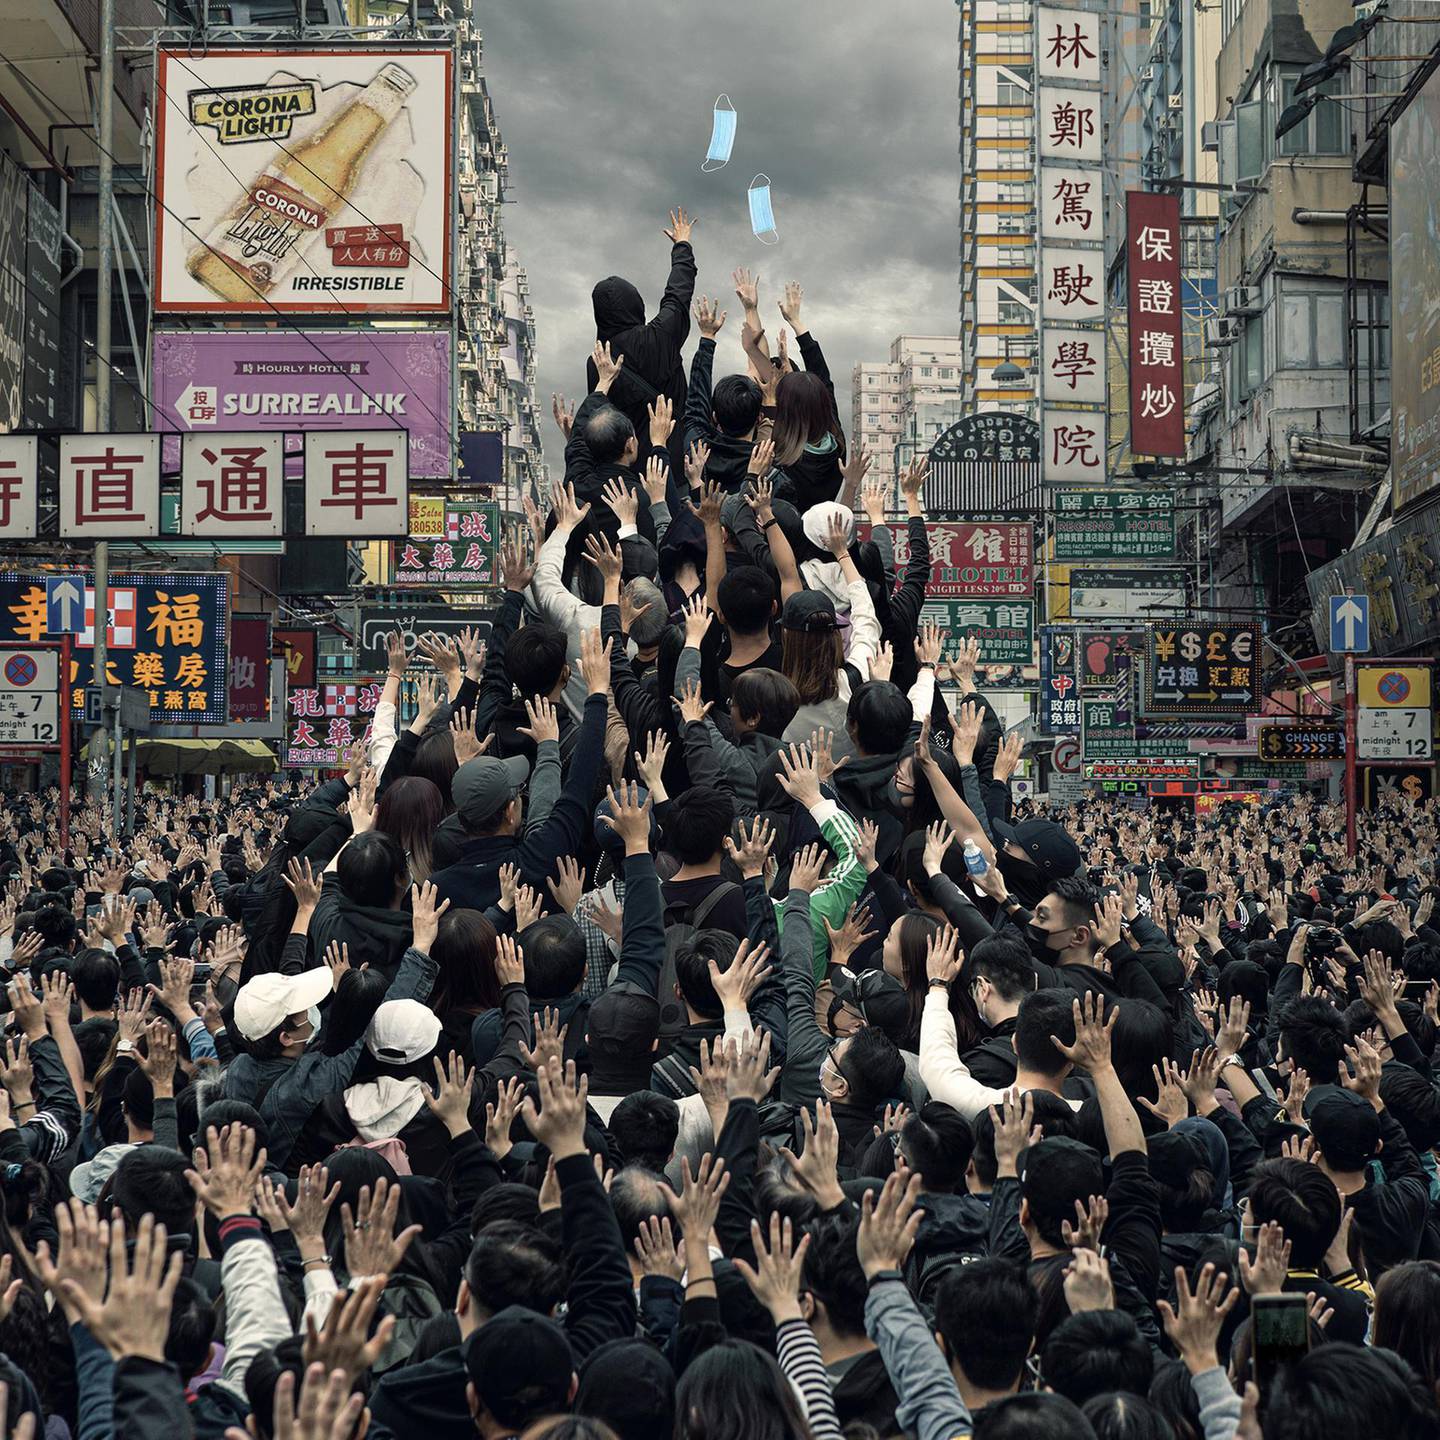 Artist Tommy Fung uses surreal elements in his digital works to comment on the Covid-19 outbreak in Hong Kong. Courtesy Tommy Fung / @surrealhk 